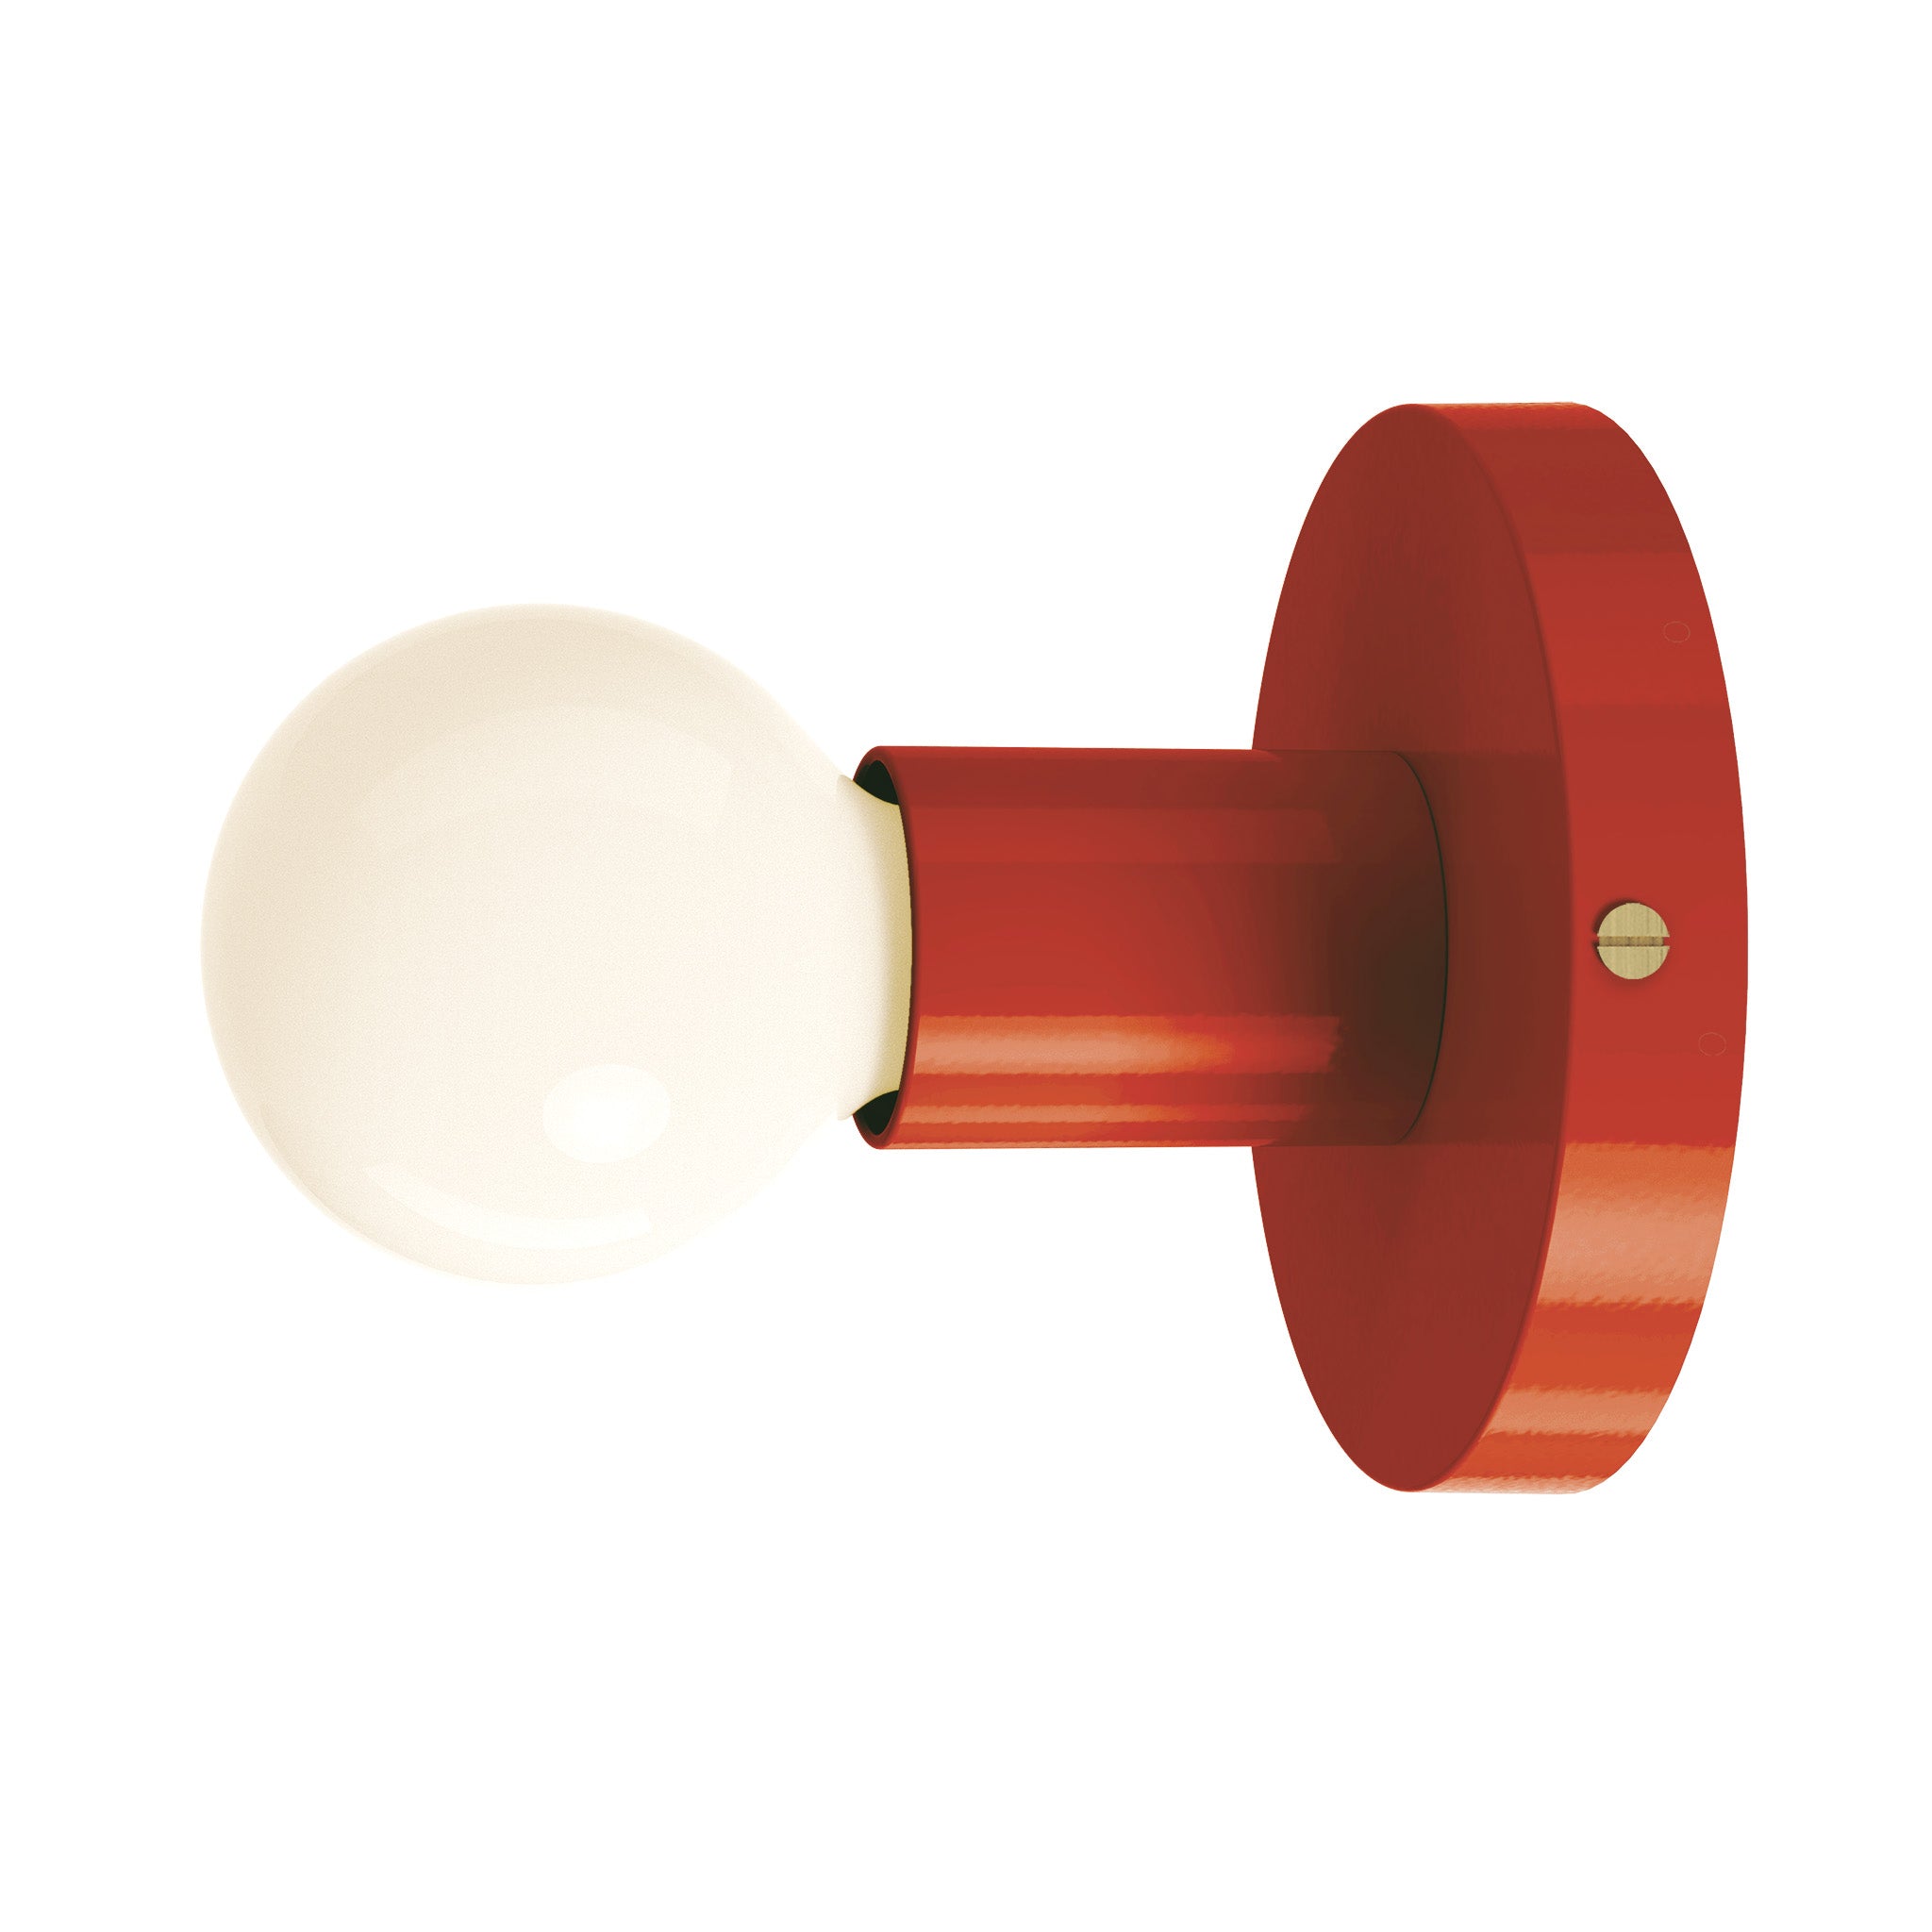 brass riding hood red color twink sconce dutton brown lighting